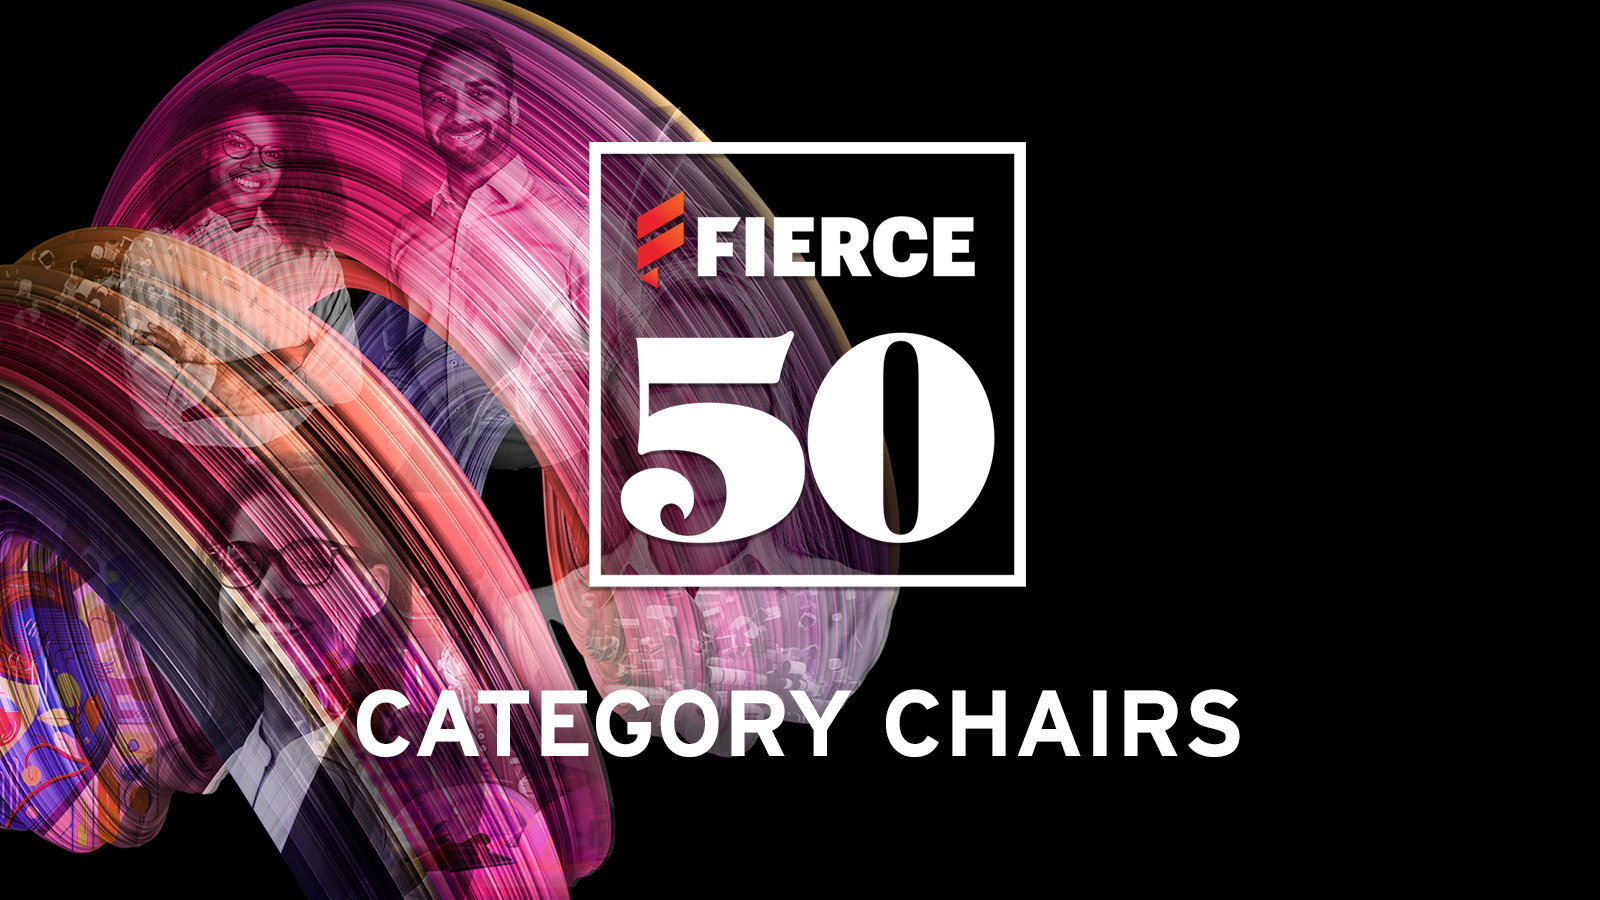 The Fierce 50 category chairs 